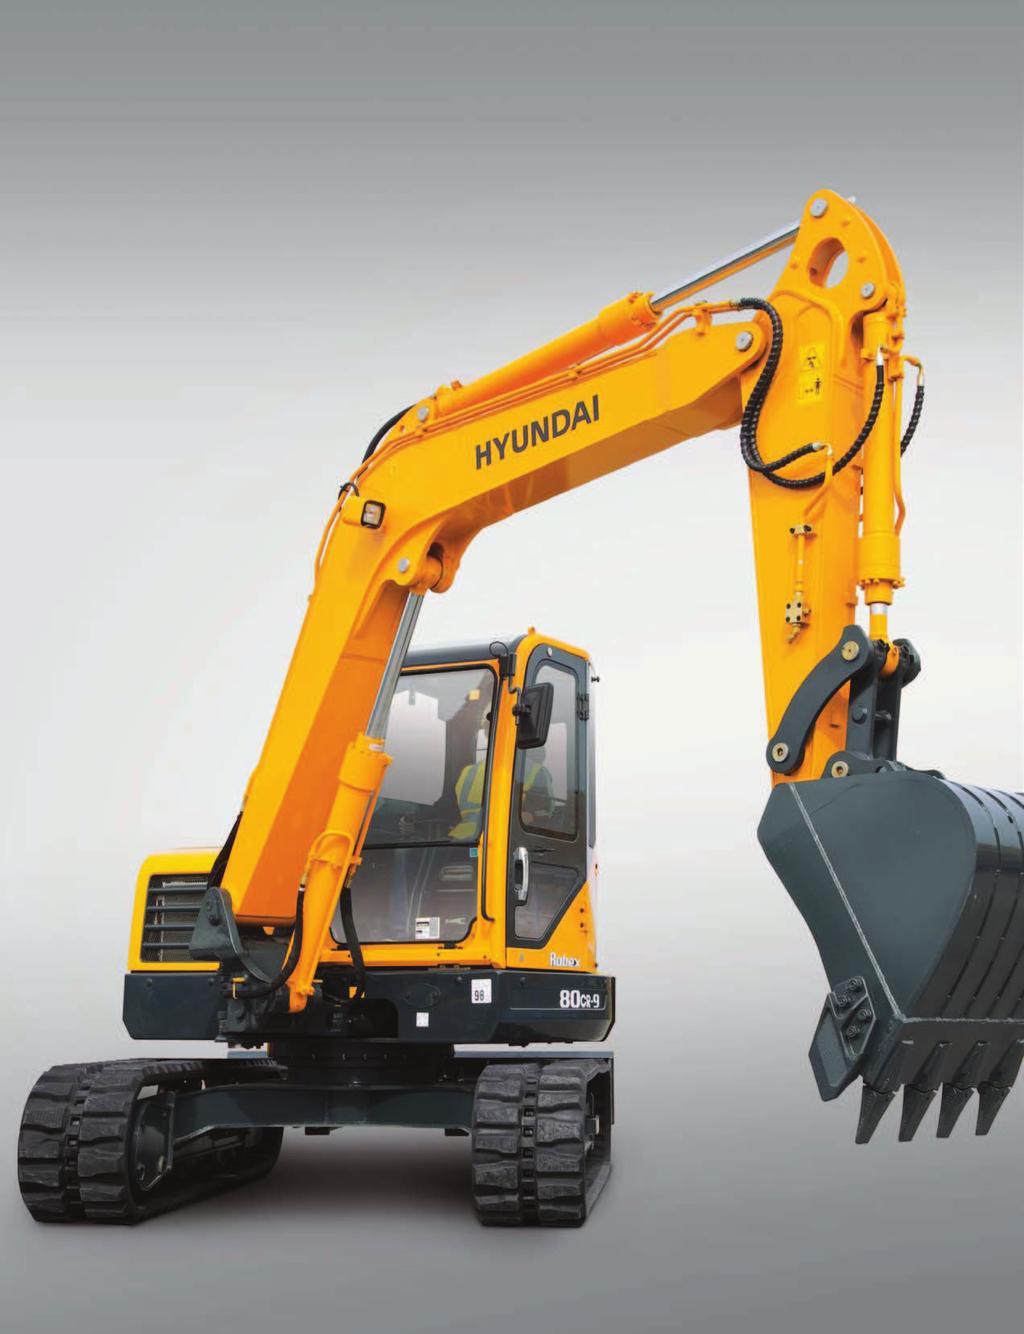 Precision & Performance Innovative hydraulic system technologies make the R80CR-9 excavator fast, smooth and easy to control.